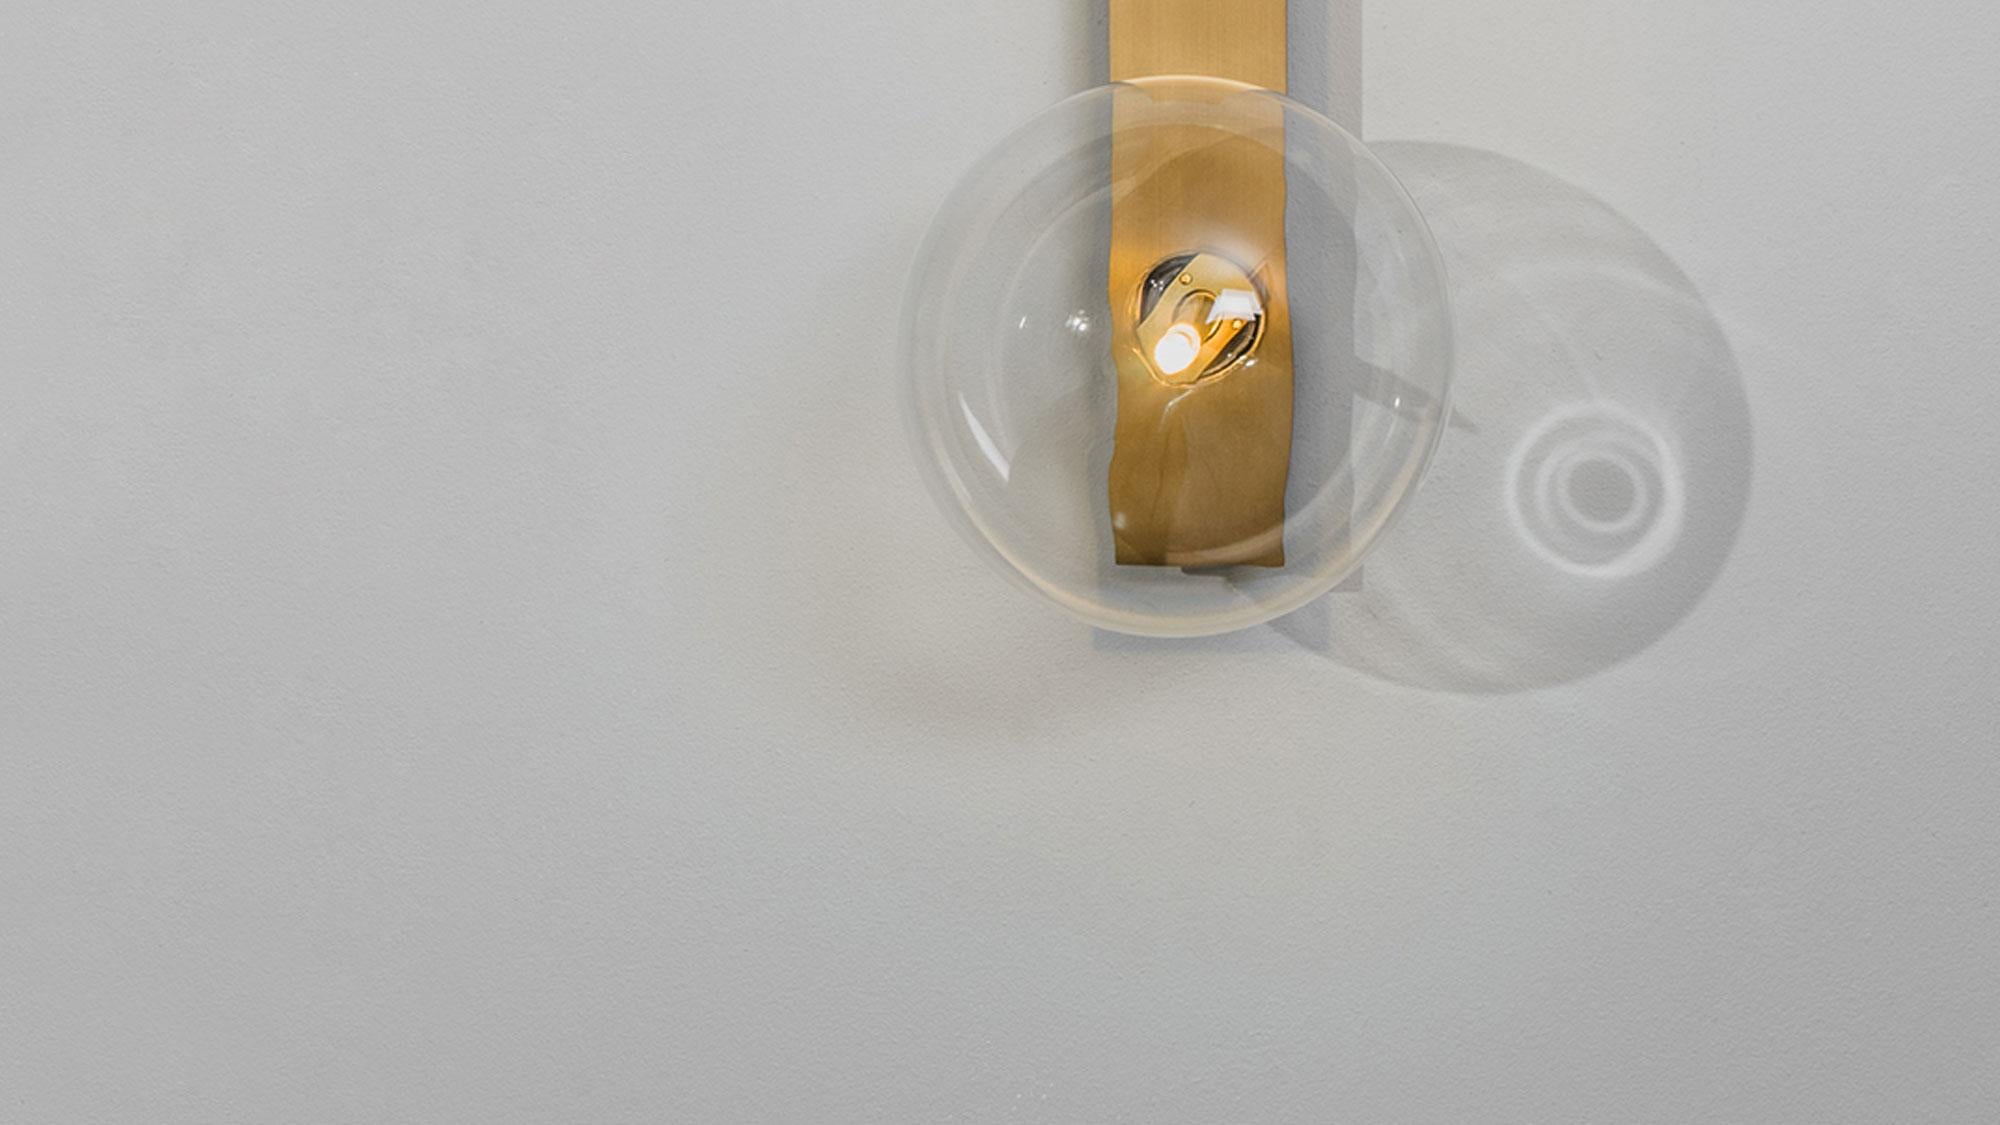 Glass bubbles alight upon a slender rectangle of brass for an essential design. Inspired by the sober compositions of mid-20th century Norwegian artist Ragnhild Keyser, the unique surface curvature of the mouth-blown globes lends a subtle optical